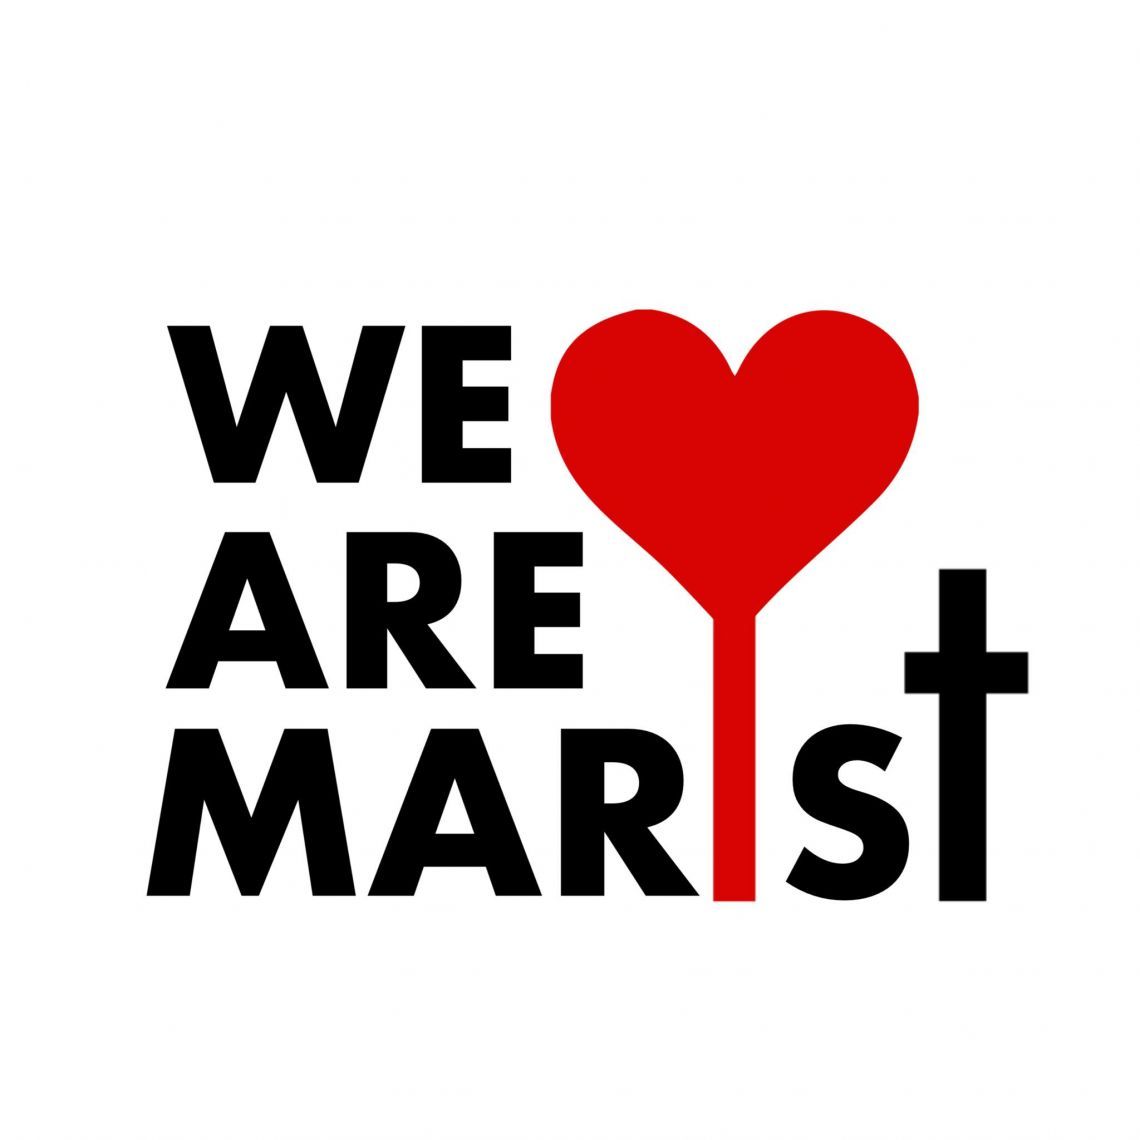 A logo that says we are marist with a red heart and cross